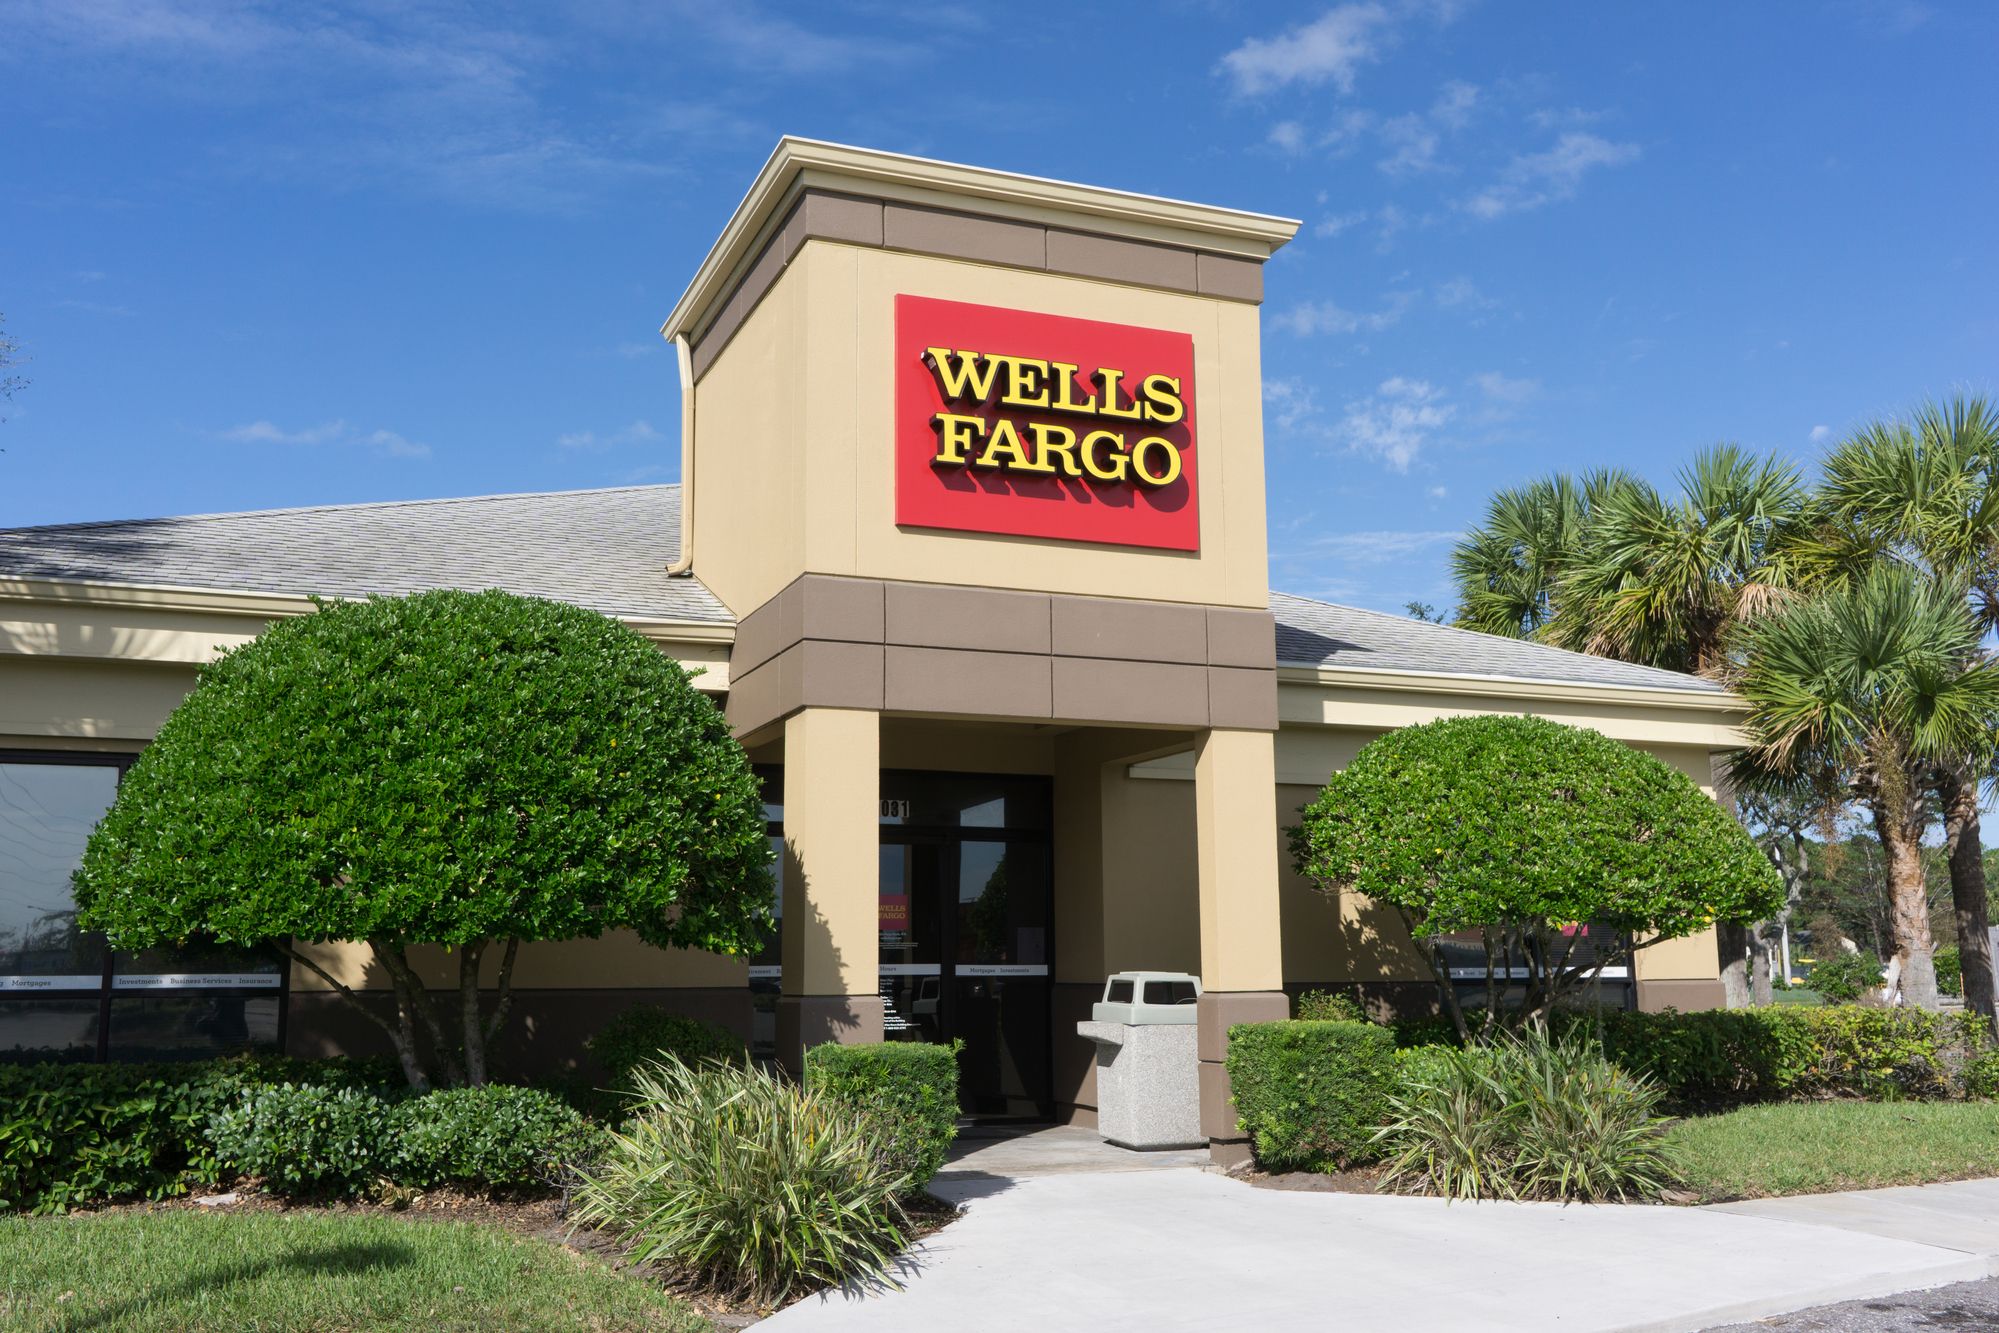 JACKSONVILLE, FL-OCTOBER 16, 2016: A Wells Fargo Bank Branch in Jacksonville, Florida. Wells Fargo & Company was founded in 1929 and currently has 9,000 bank branches in 39 states.